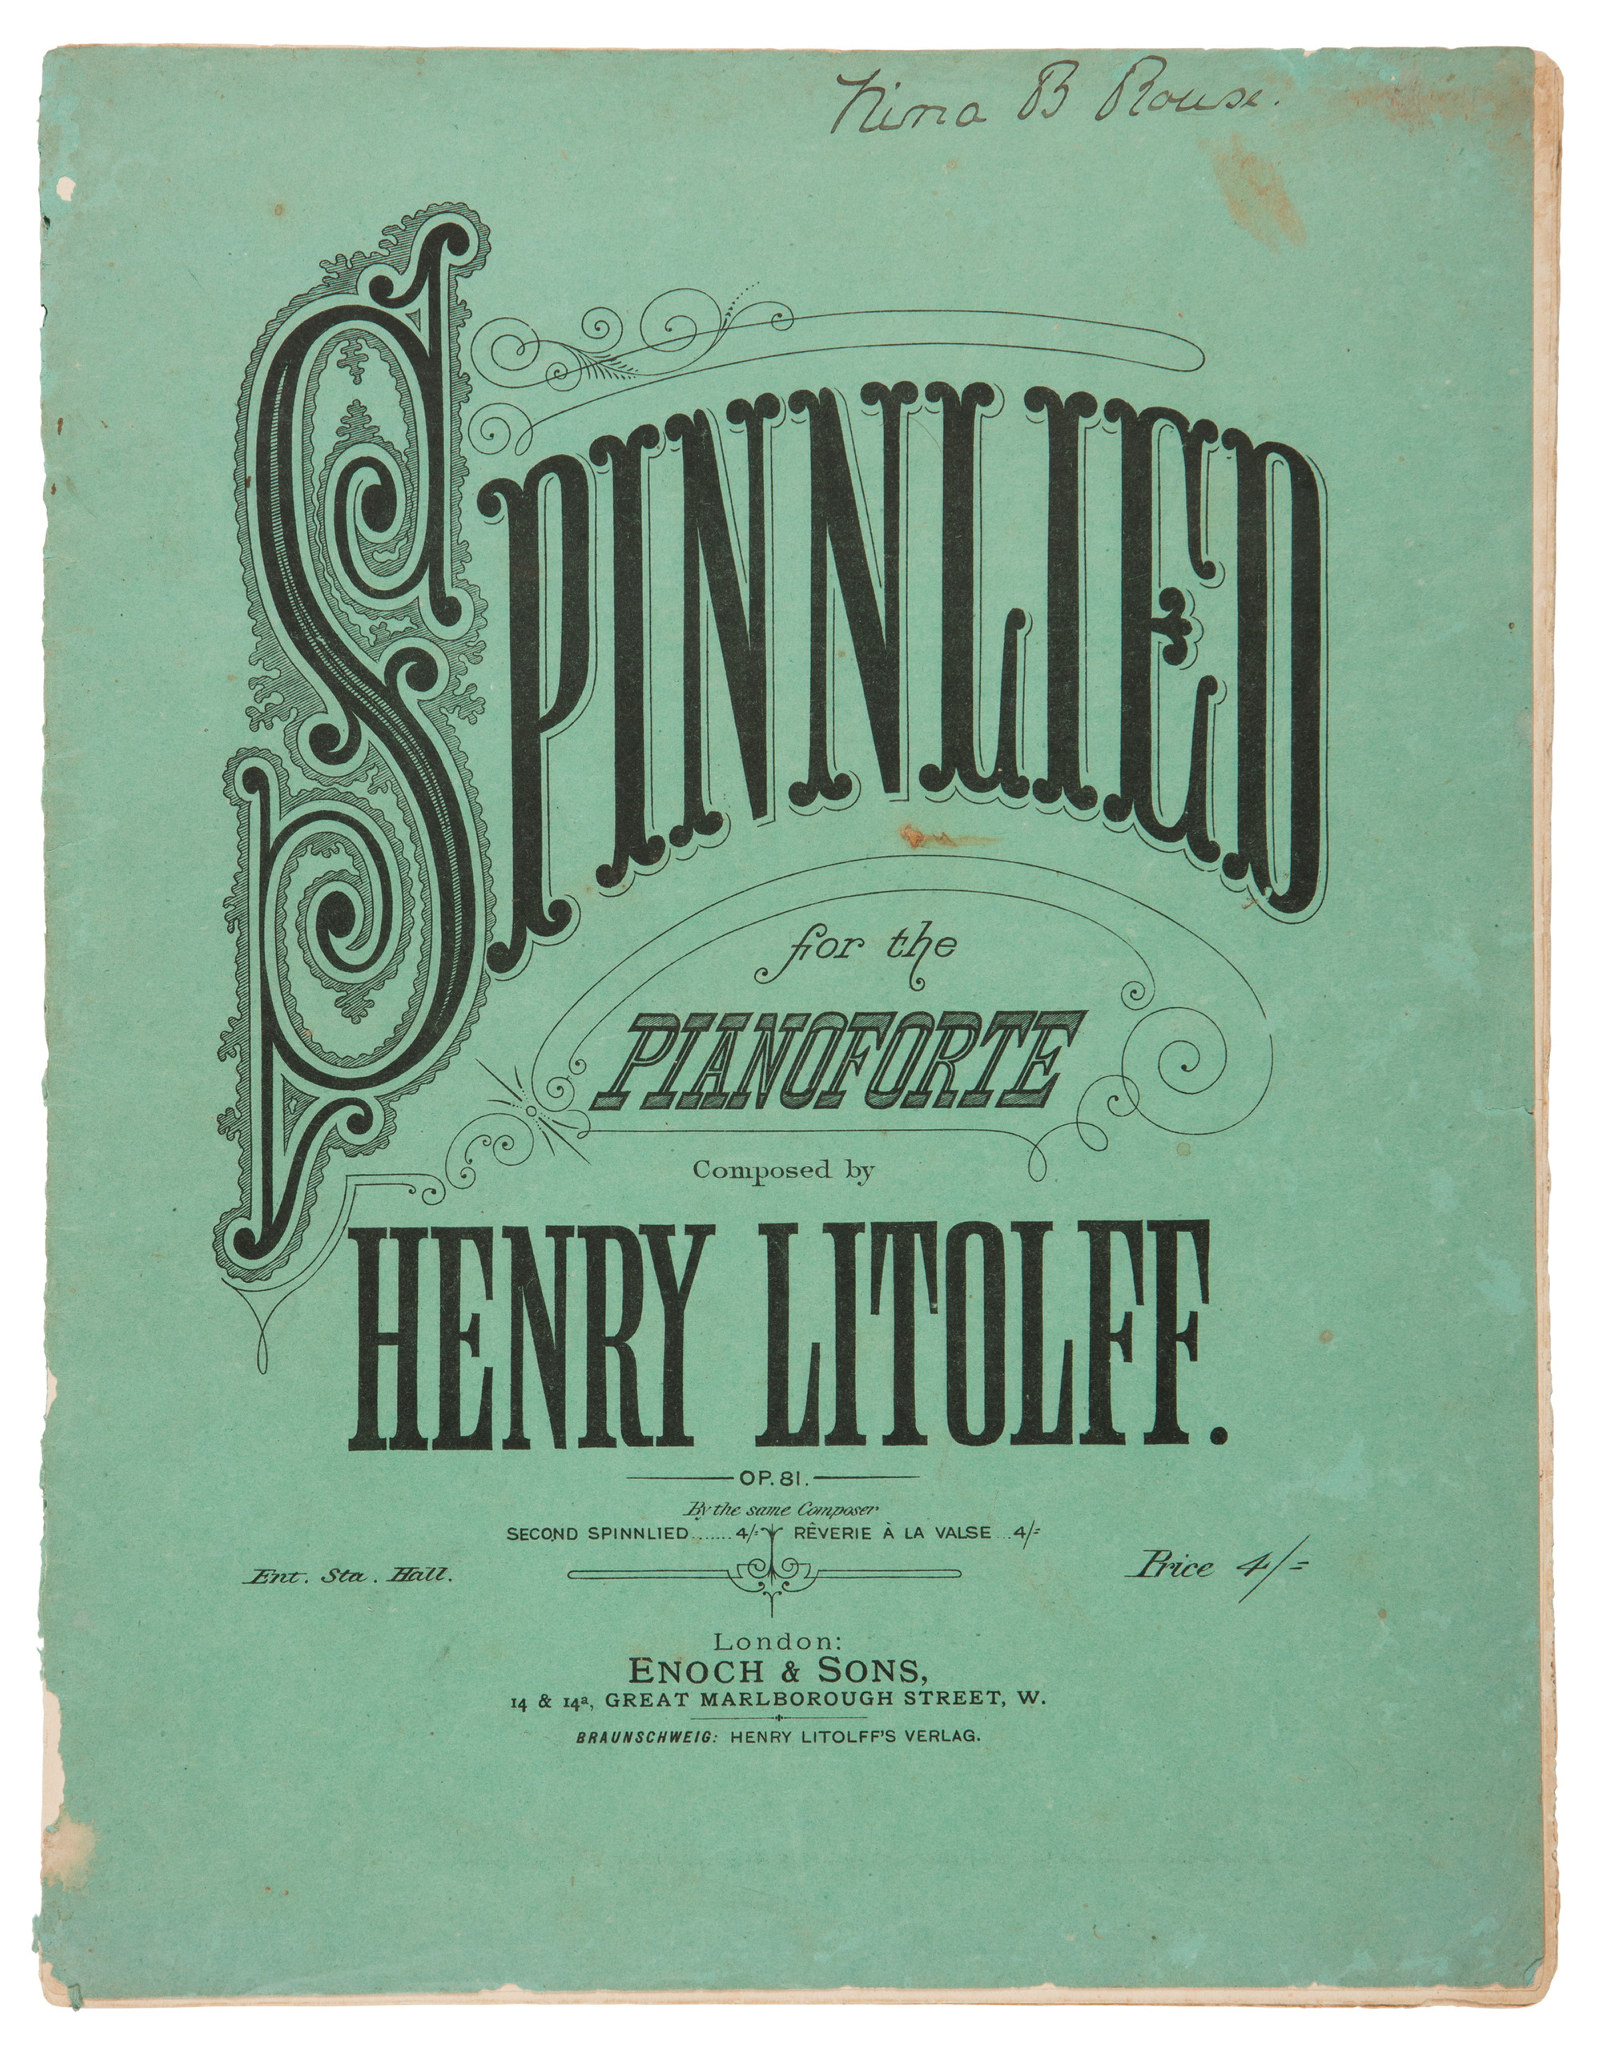 Green piano music  book cover with title in ornate writing.